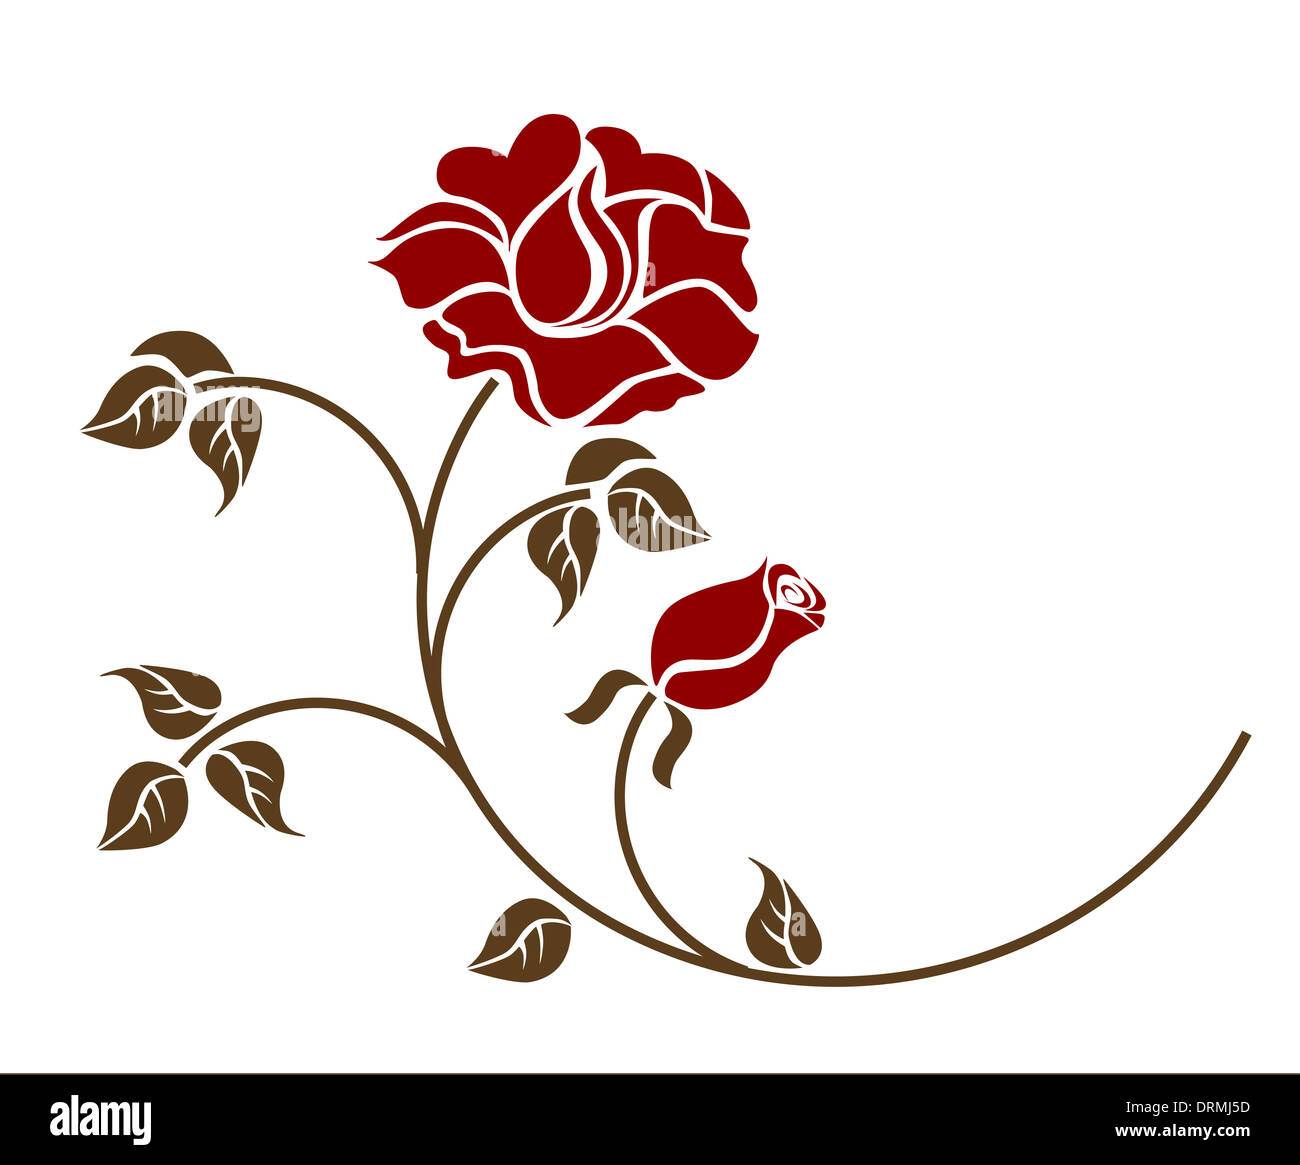 red roses on the white backgroud. Stock Photo